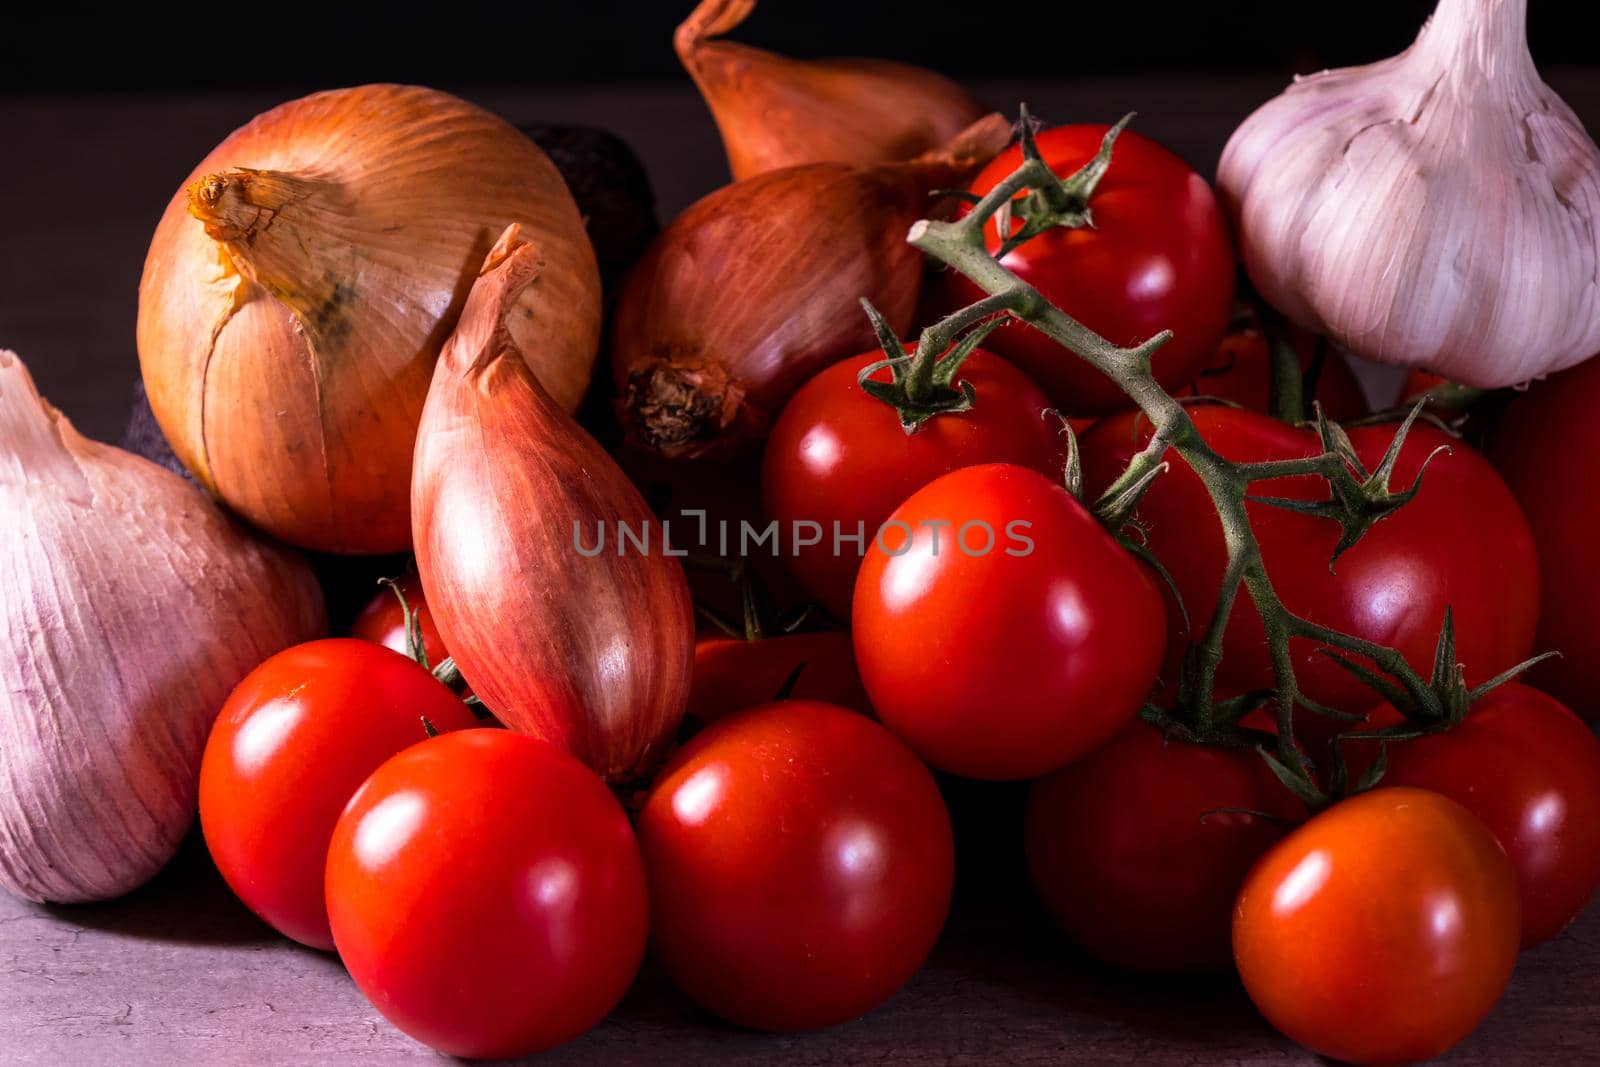 assorted garlic tomatoes and onions for a kitchen decoration poster by jp_chretien